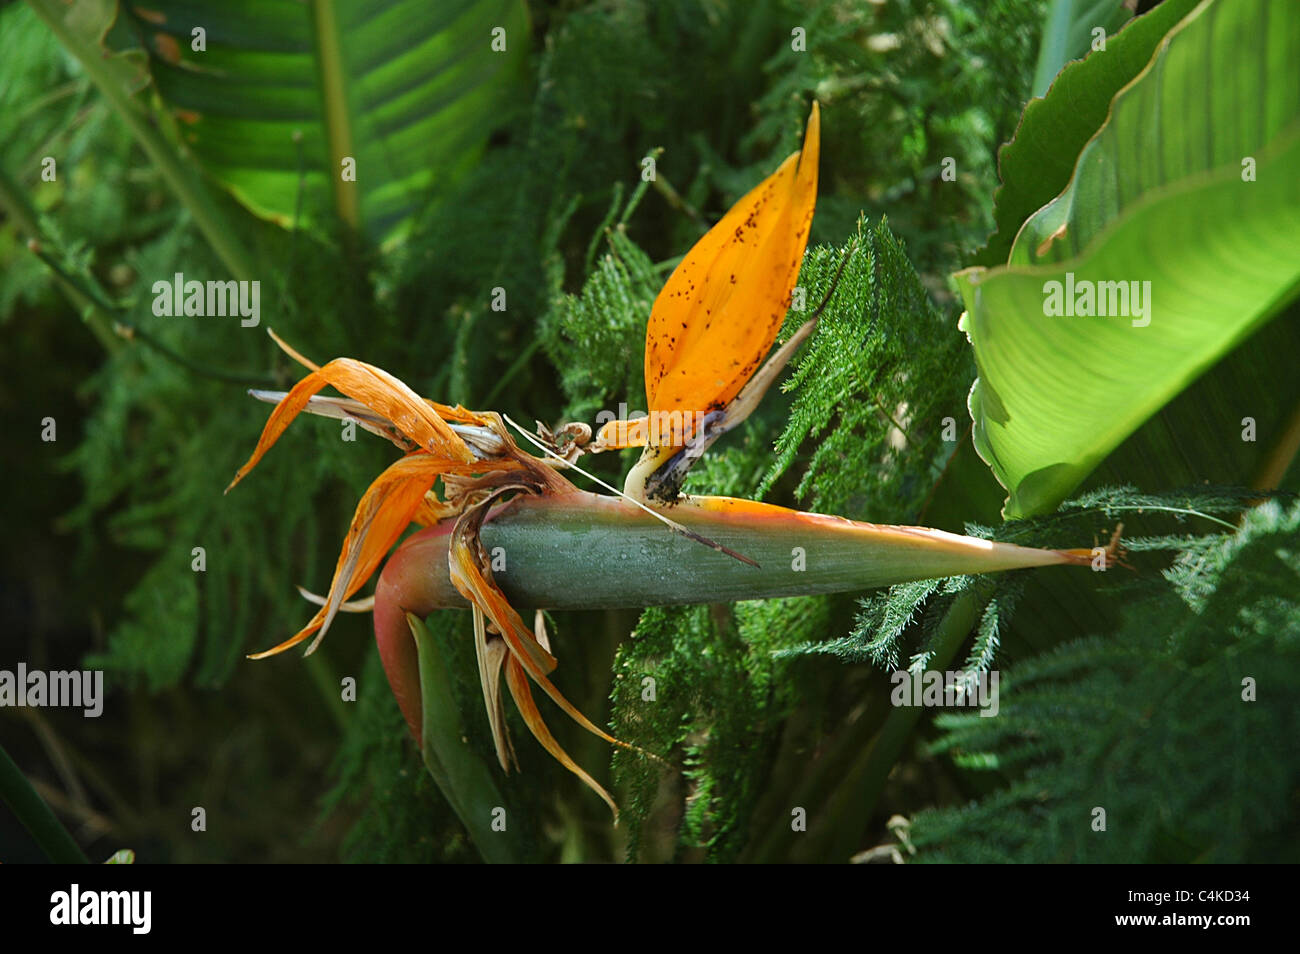 The Bird of Paradise Flower is a common name for the Strelitzia plant. The plant is native to South Africa. Stock Photo